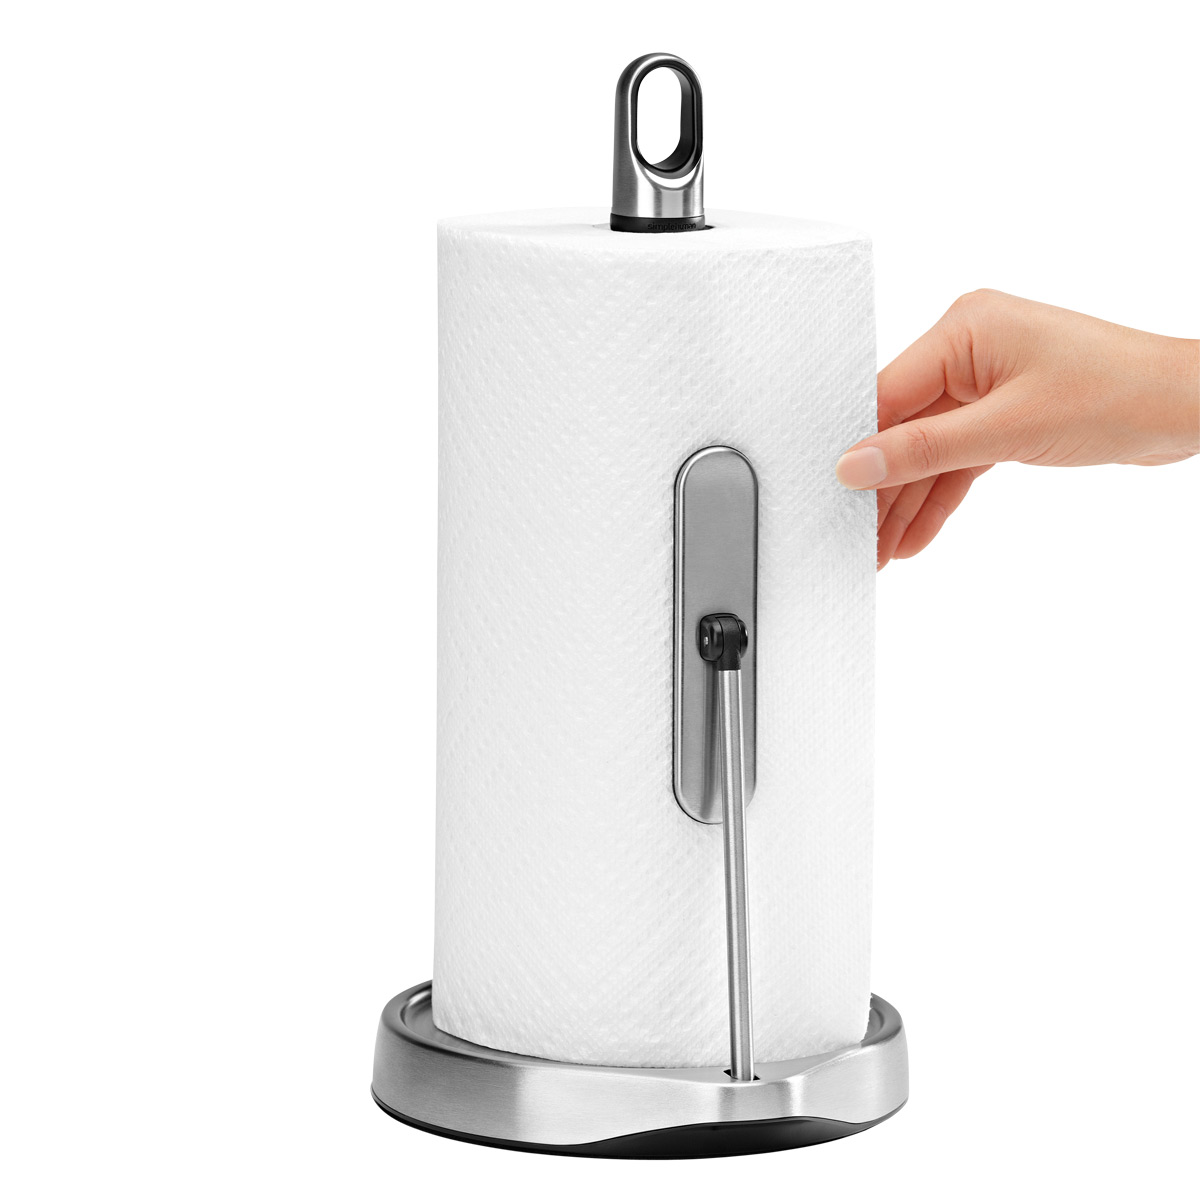 https://www.containerstore.com/catalogimages/378503/10059522-SH-Paper-Towel-Holder-VEN2.jpg